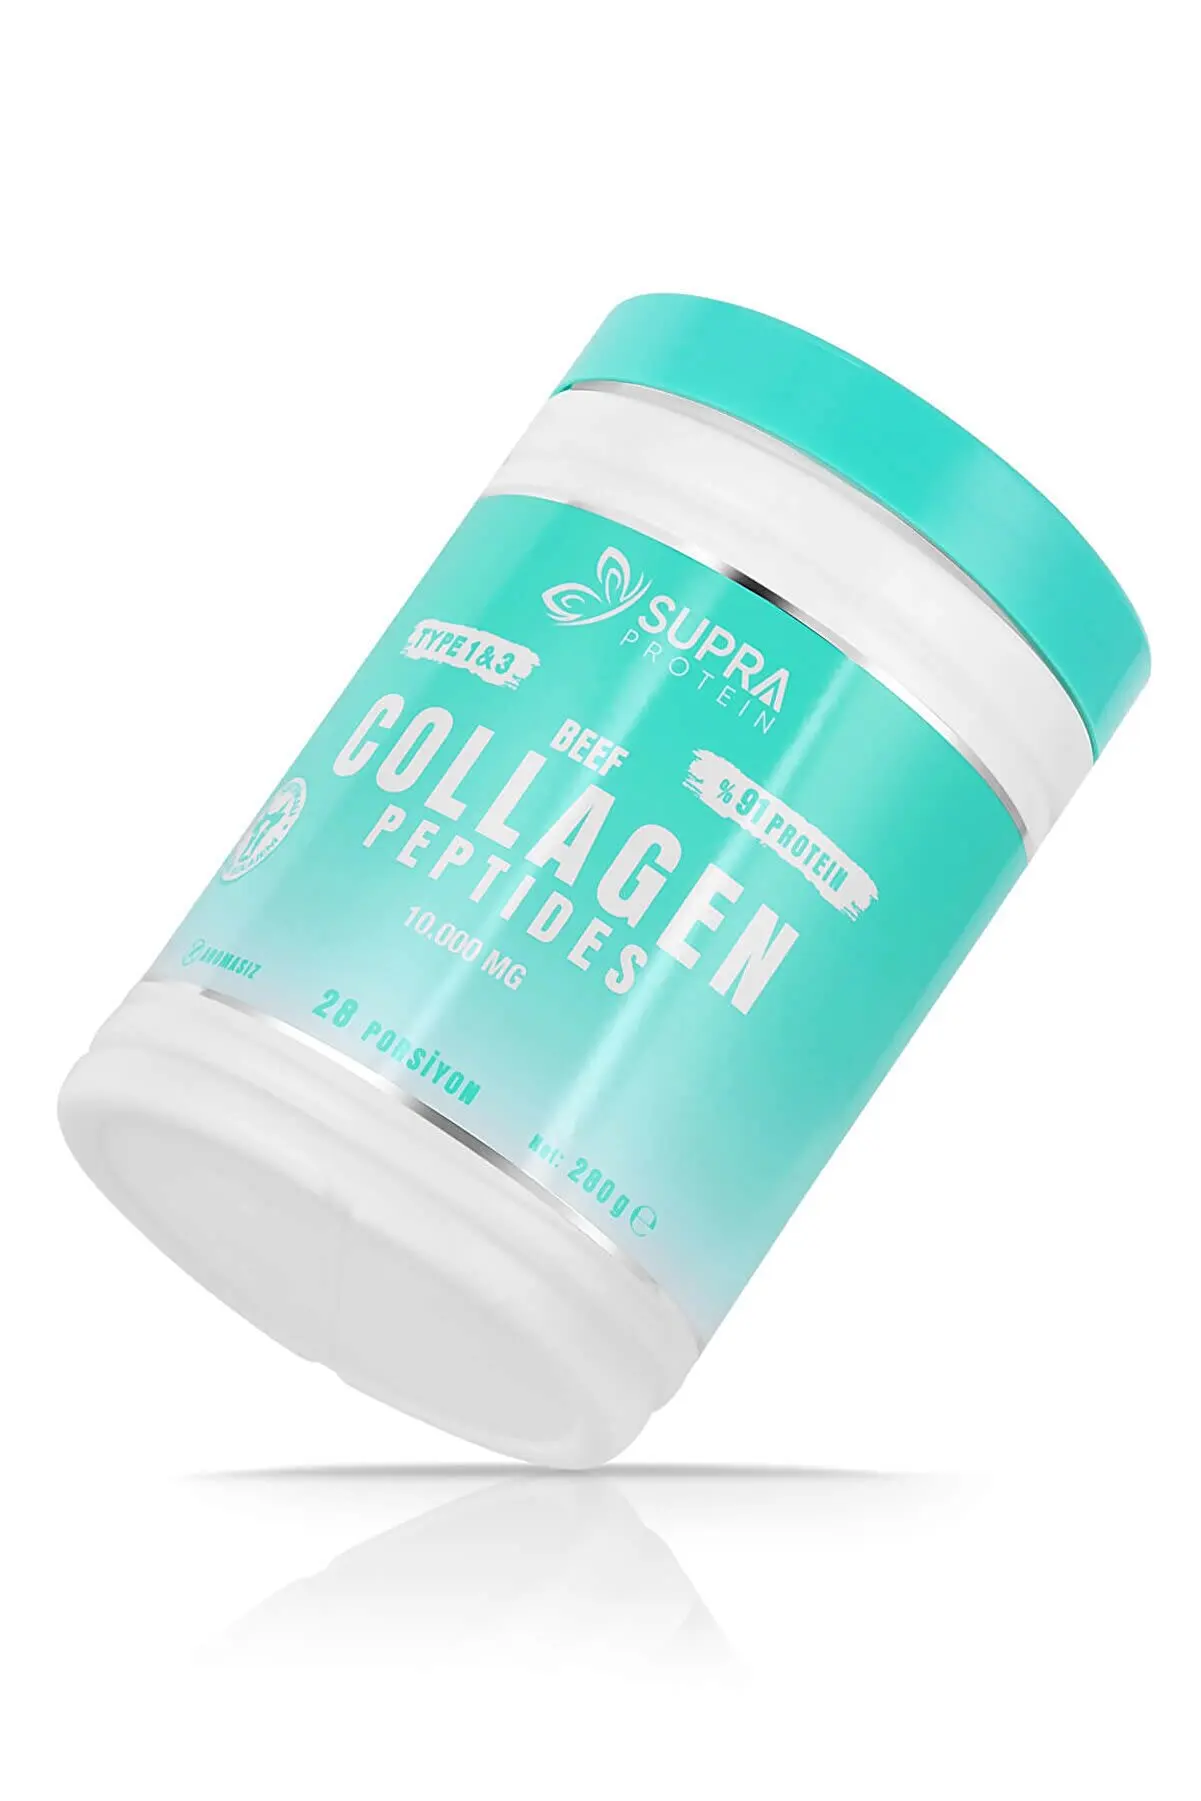 

Supra Protein Beef Collagen 280 Gr Hydrolyzed Powder Collagen, For Joint, Bone, Cartilage Health And Sports Nutrition, Amino Aci